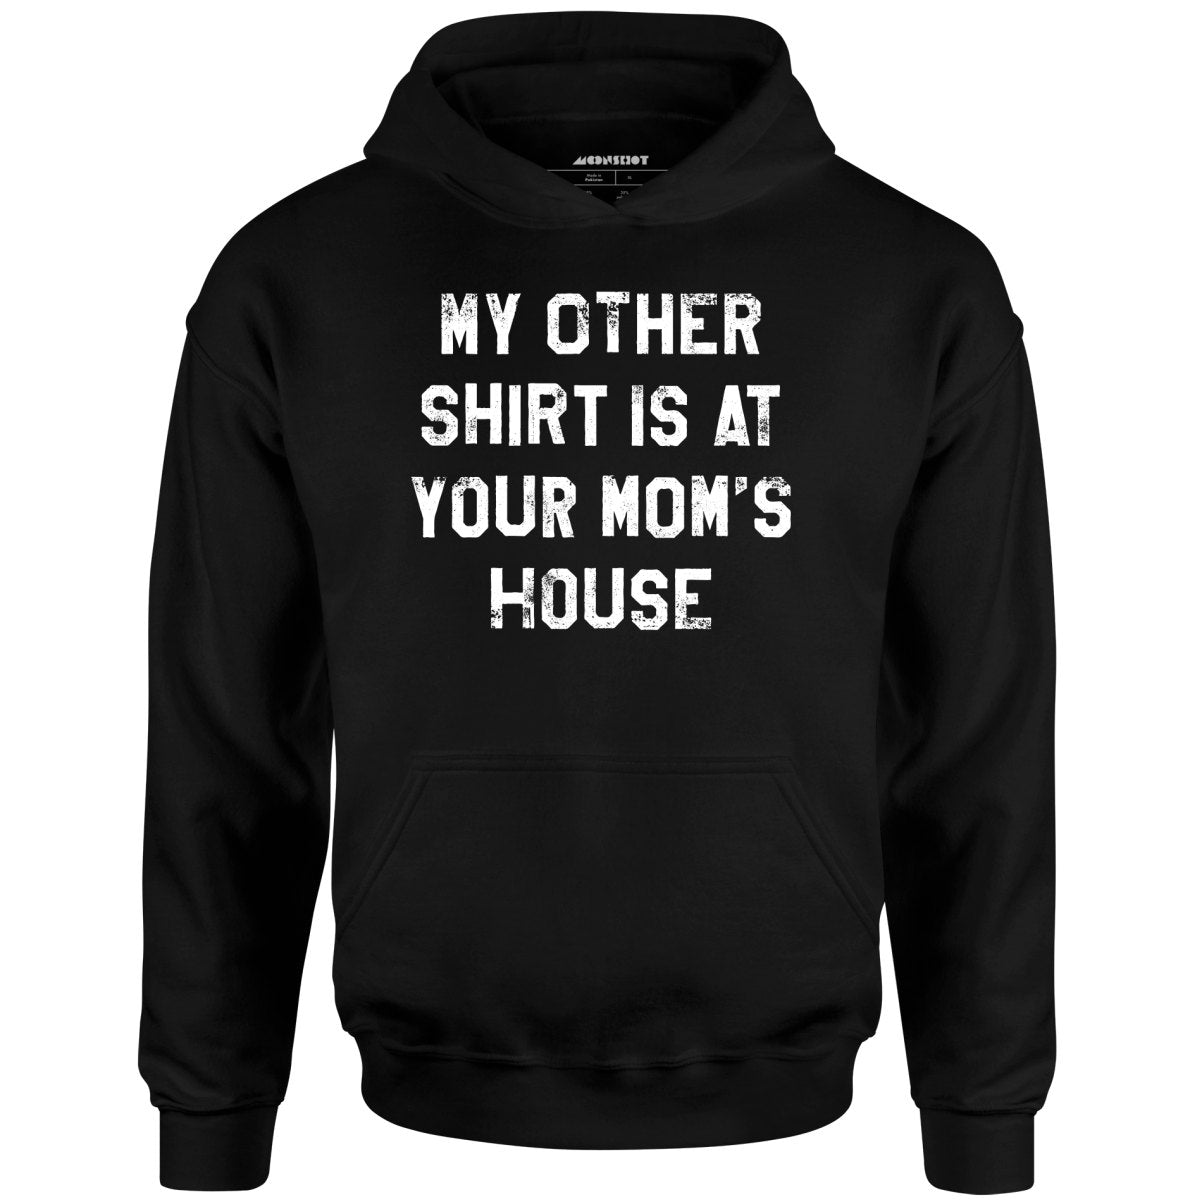 My Other Shirt Is At Your Mom's House - Unisex Hoodie